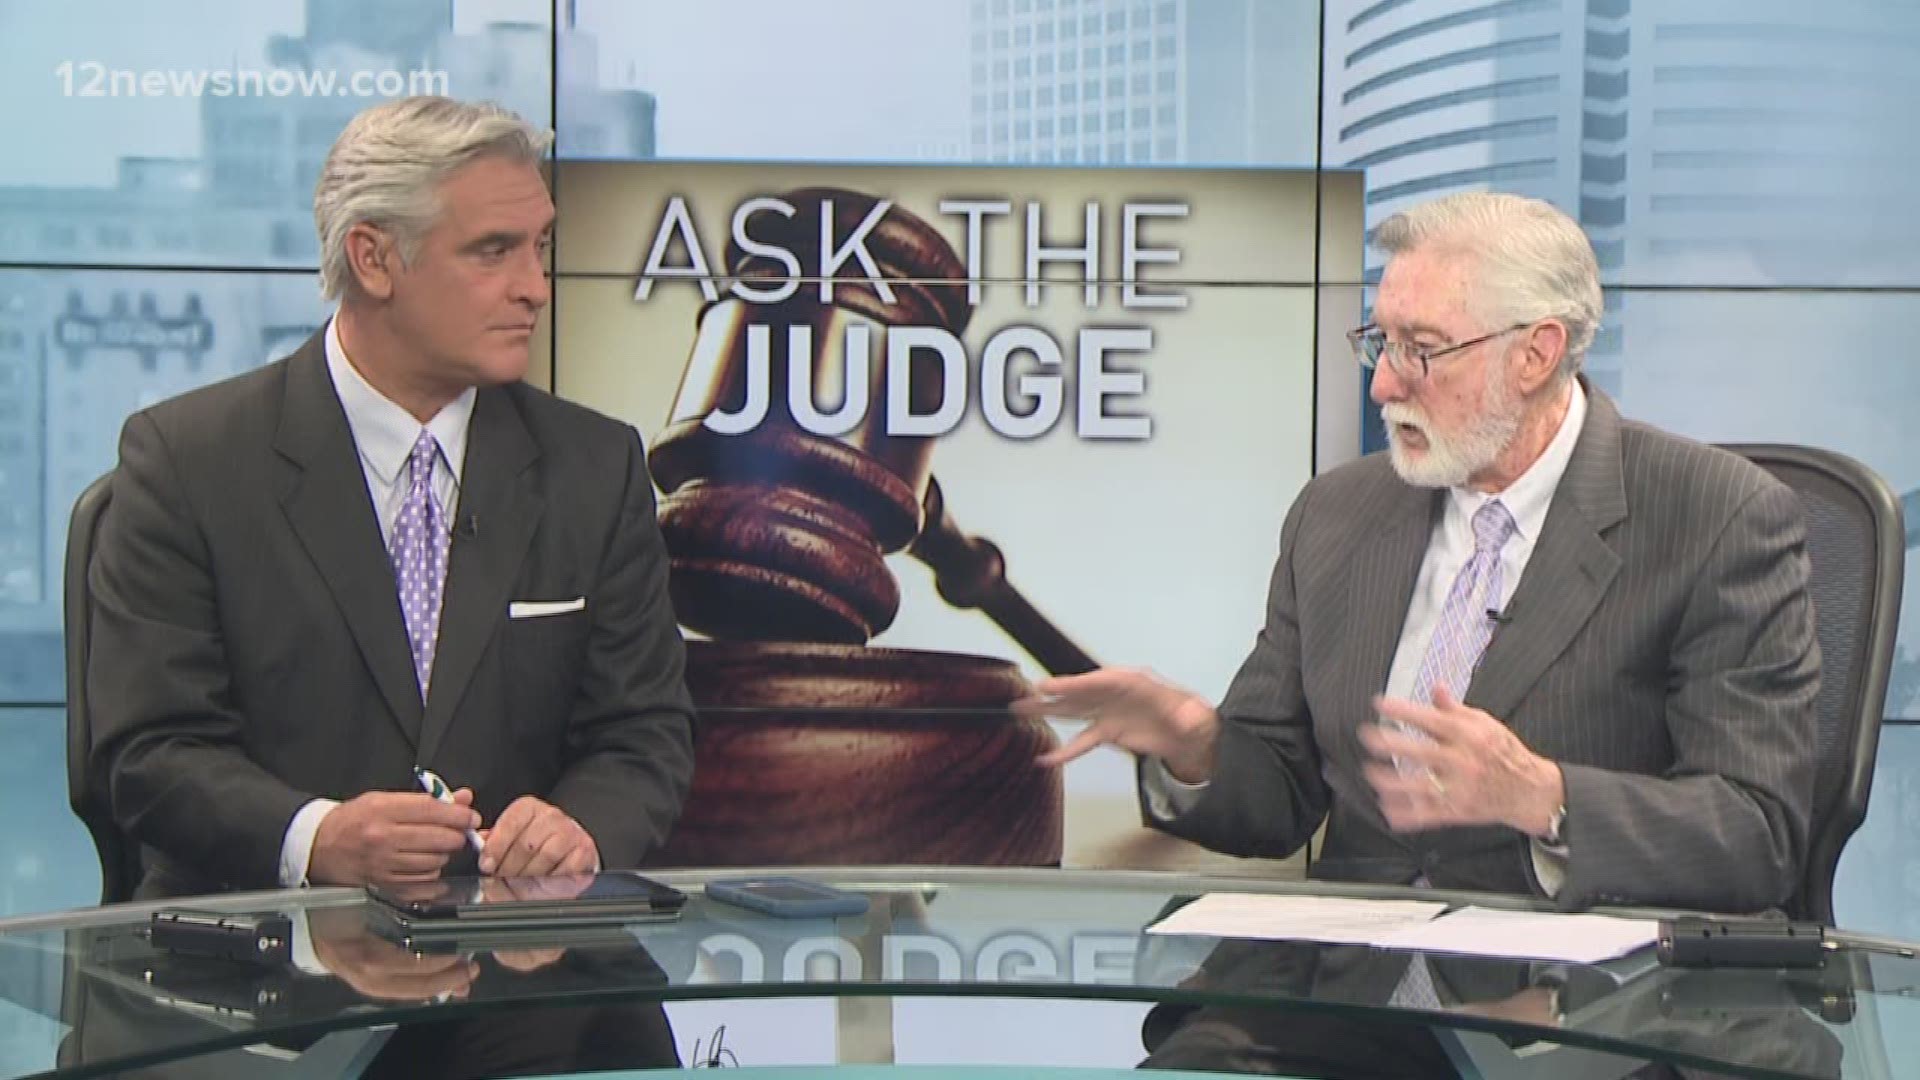 Today on Ask the Judge, the Honorable Larry Thorne answers viewer questions, like "do I have to give my ex-spouse visitation rights?"